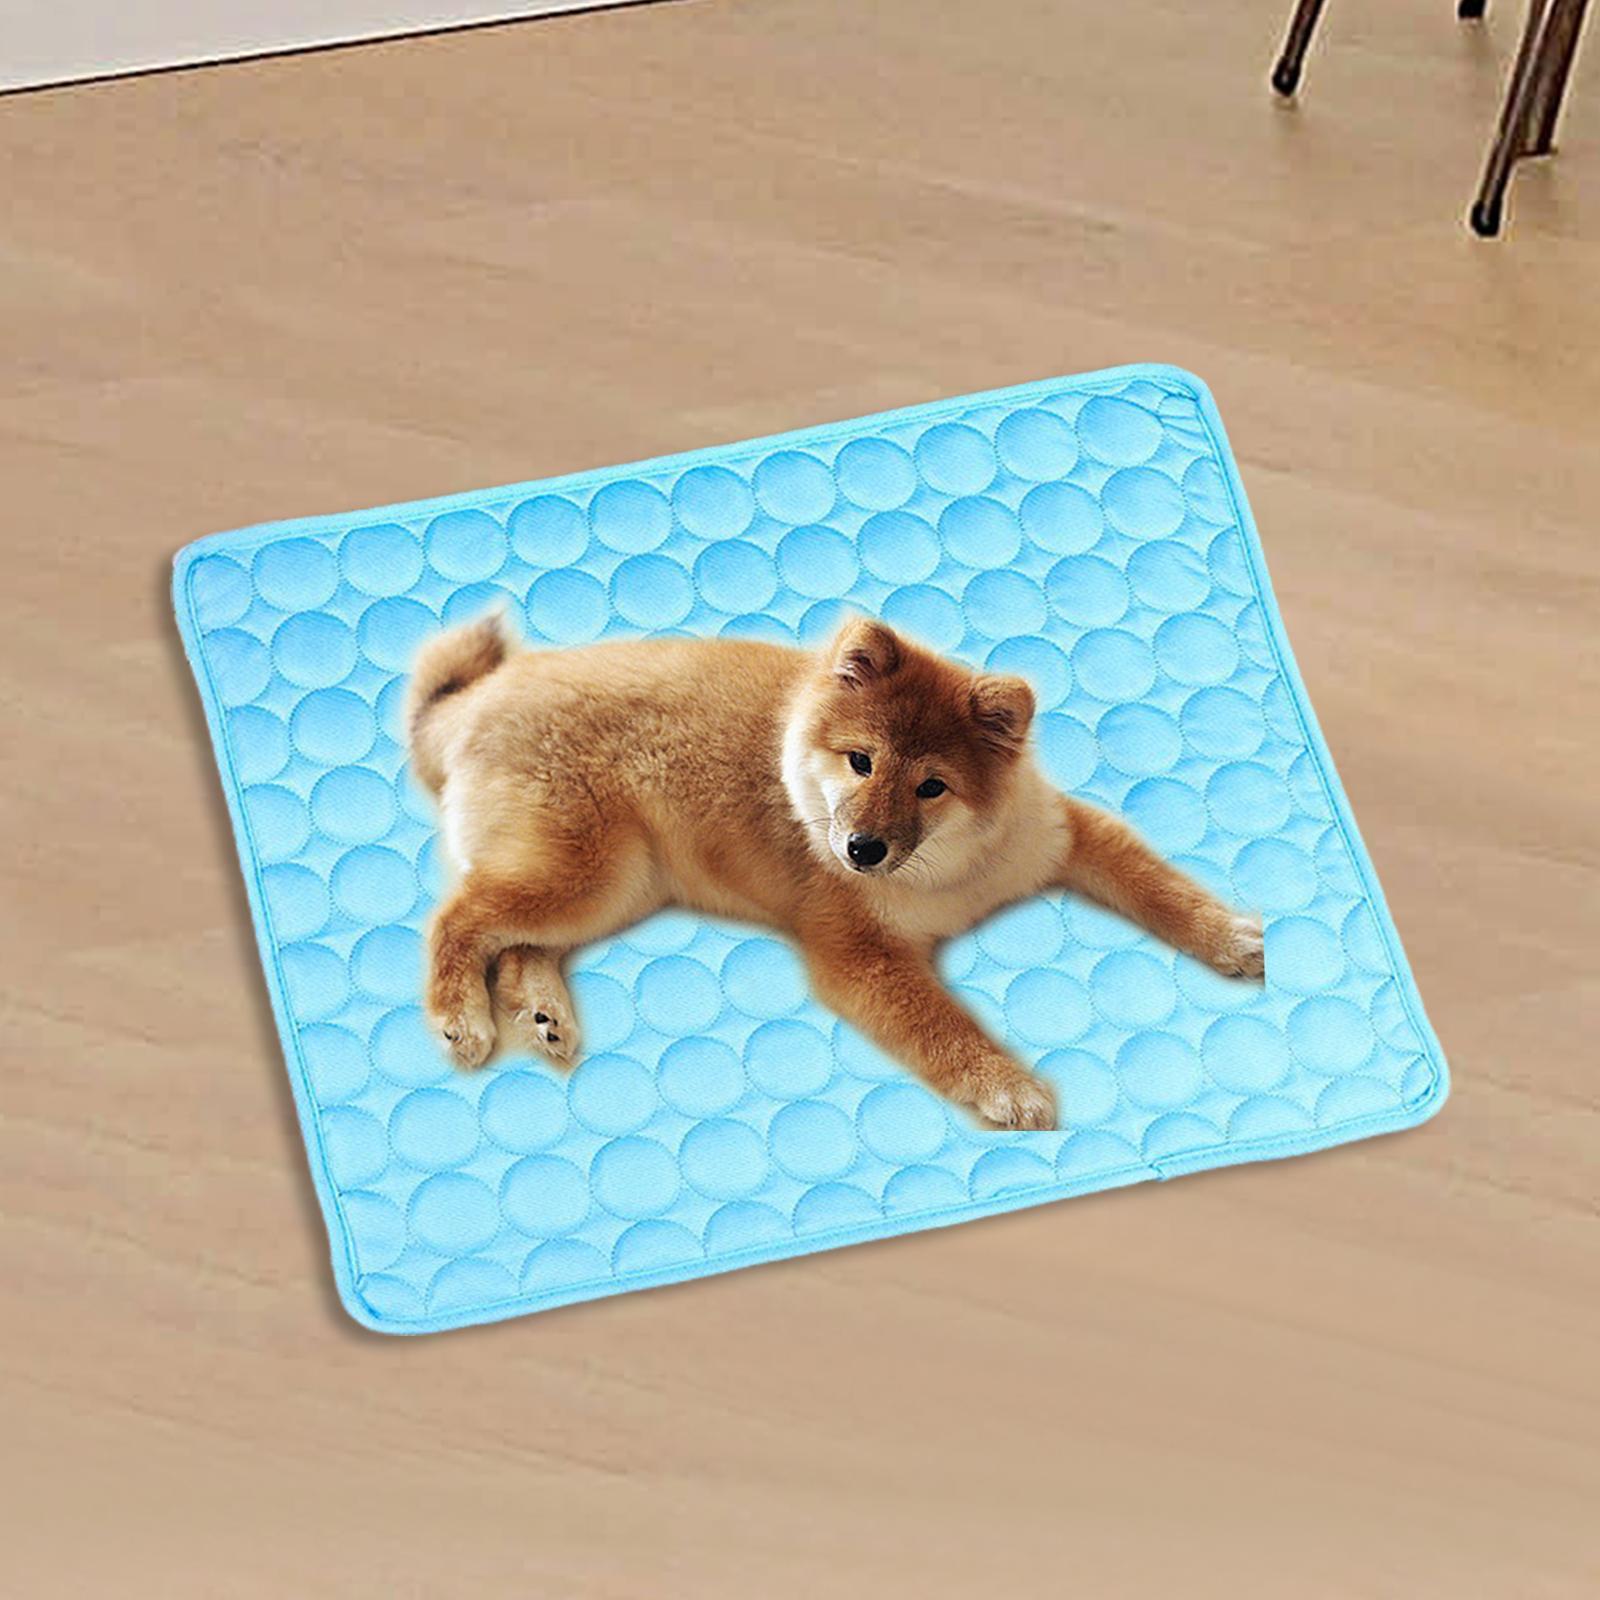 Dog Cooling Mat Summer Dog Cooling Pad Sleeping Pad for Car Travel Dogs Cats